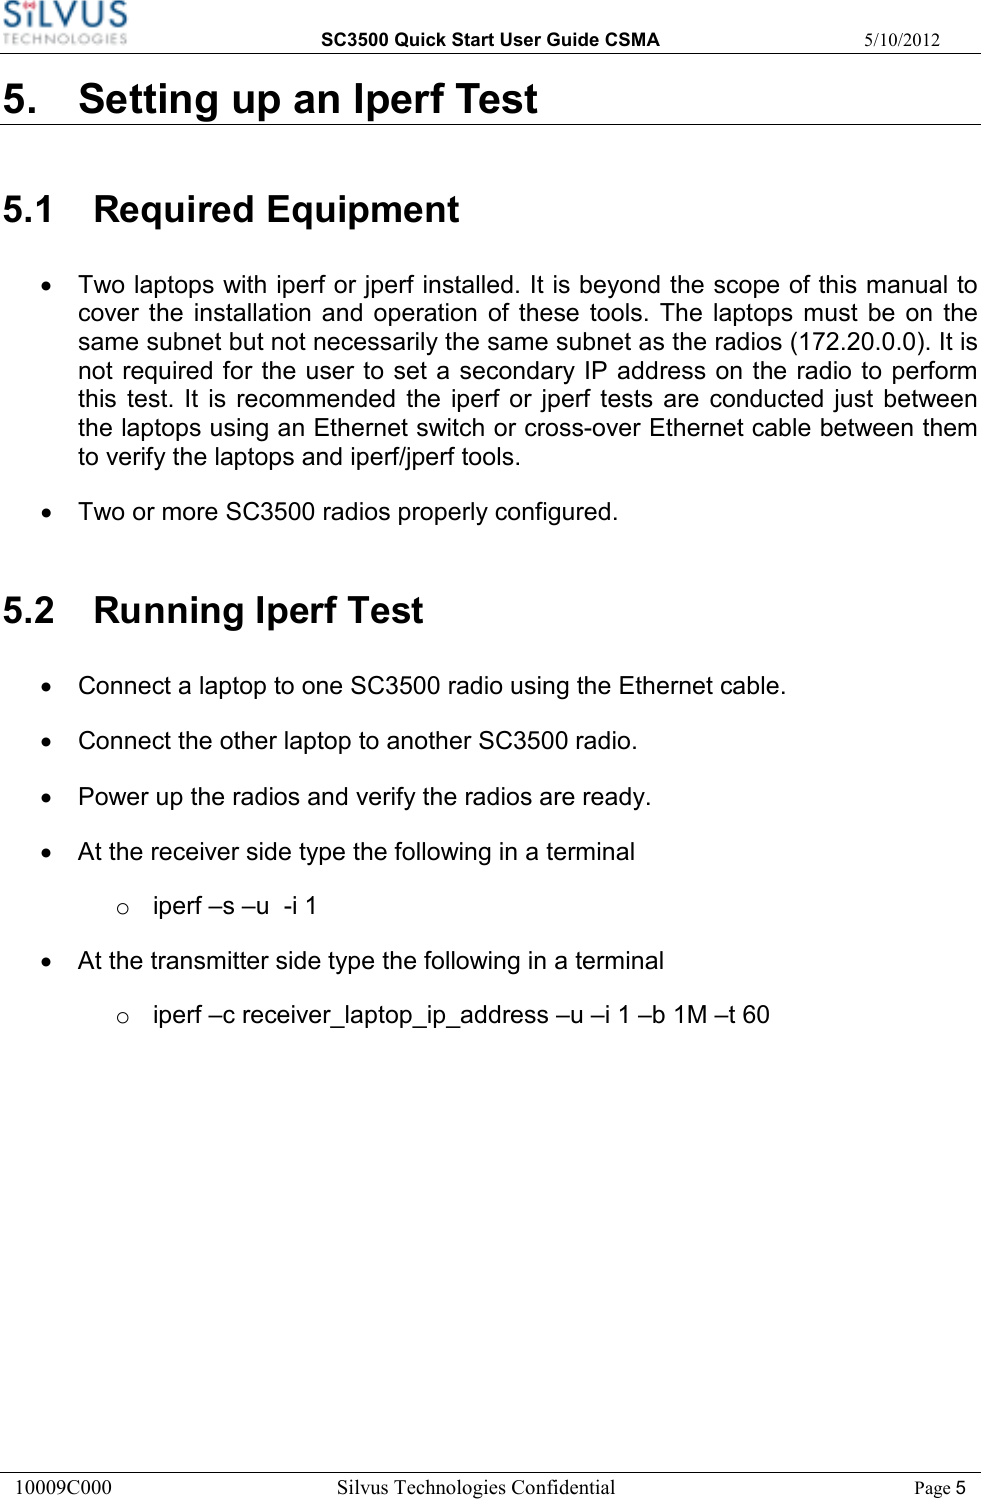  SC3500 Quick Start User Guide CSMA  5/10/2012 10009C000       Silvus Technologies Confidential    Page 5 5.  Setting up an Iperf Test 5.1  Required Equipment •  Two laptops with iperf or jperf installed. It is beyond the scope of this manual to cover  the  installation and  operation  of  these  tools. The  laptops  must be  on  the same subnet but not necessarily the same subnet as the radios (172.20.0.0). It is not required for the user to set a secondary IP address on the radio to perform this  test. It  is  recommended  the  iperf or  jperf  tests  are  conducted  just  between the laptops using an Ethernet switch or cross-over Ethernet cable between them to verify the laptops and iperf/jperf tools. •  Two or more SC3500 radios properly configured.  5.2  Running Iperf Test •  Connect a laptop to one SC3500 radio using the Ethernet cable. •  Connect the other laptop to another SC3500 radio. •  Power up the radios and verify the radios are ready. •  At the receiver side type the following in a terminal o  iperf –s –u  -i 1 •  At the transmitter side type the following in a terminal o  iperf –c receiver_laptop_ip_address –u –i 1 –b 1M –t 60  